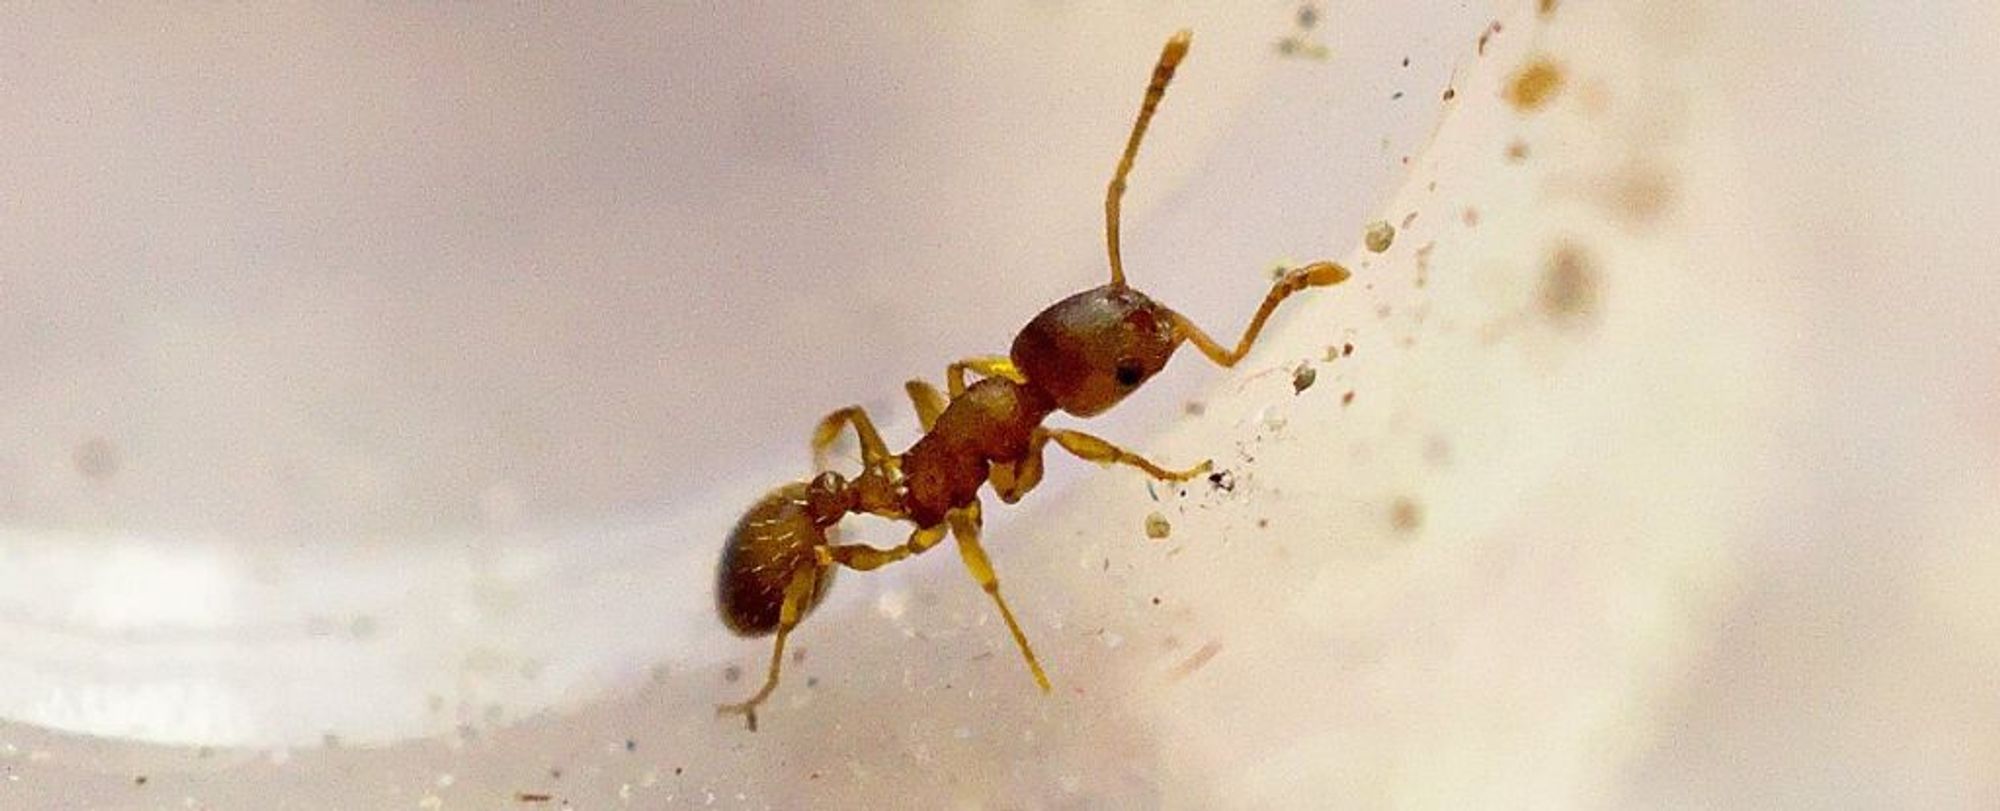 There's a Parasite That Triples Ants' Lifespans… And It Actually Sounds Pretty Great